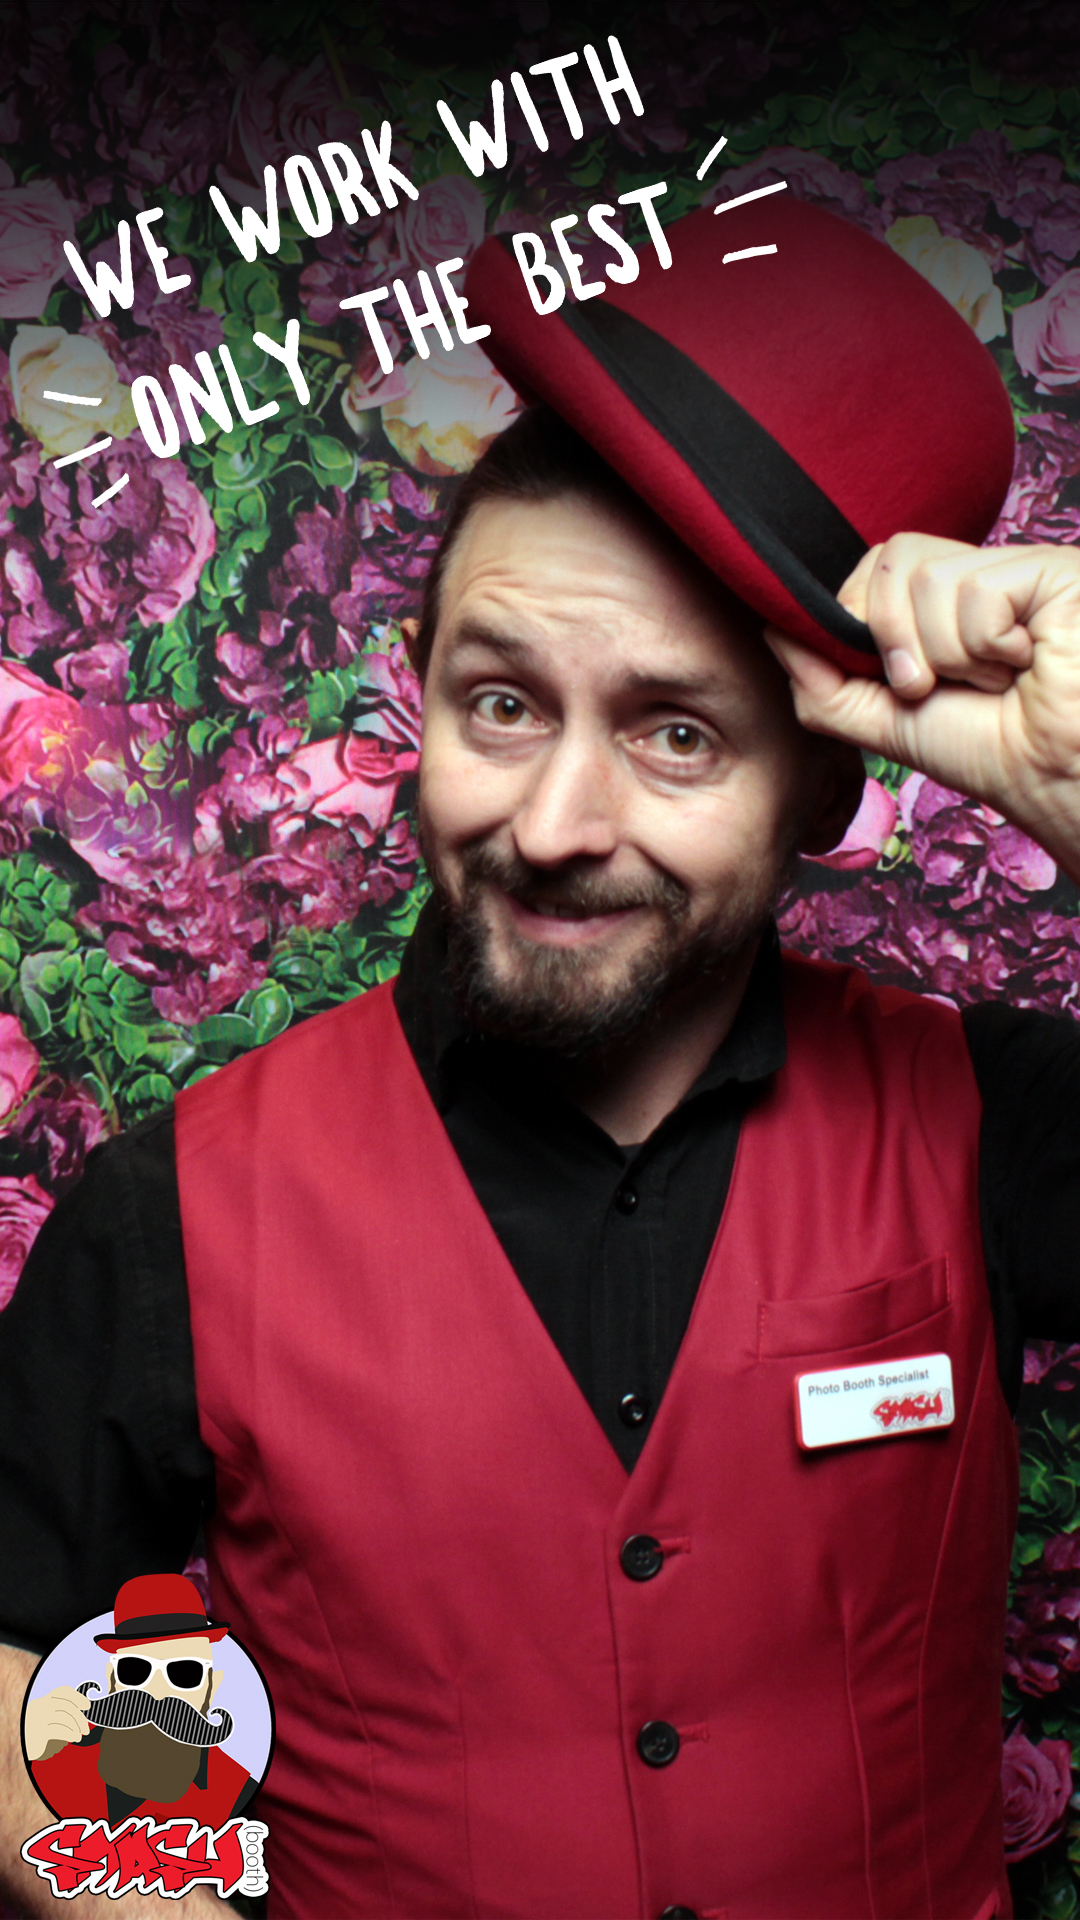 Smashbooth employee with red hat and vest